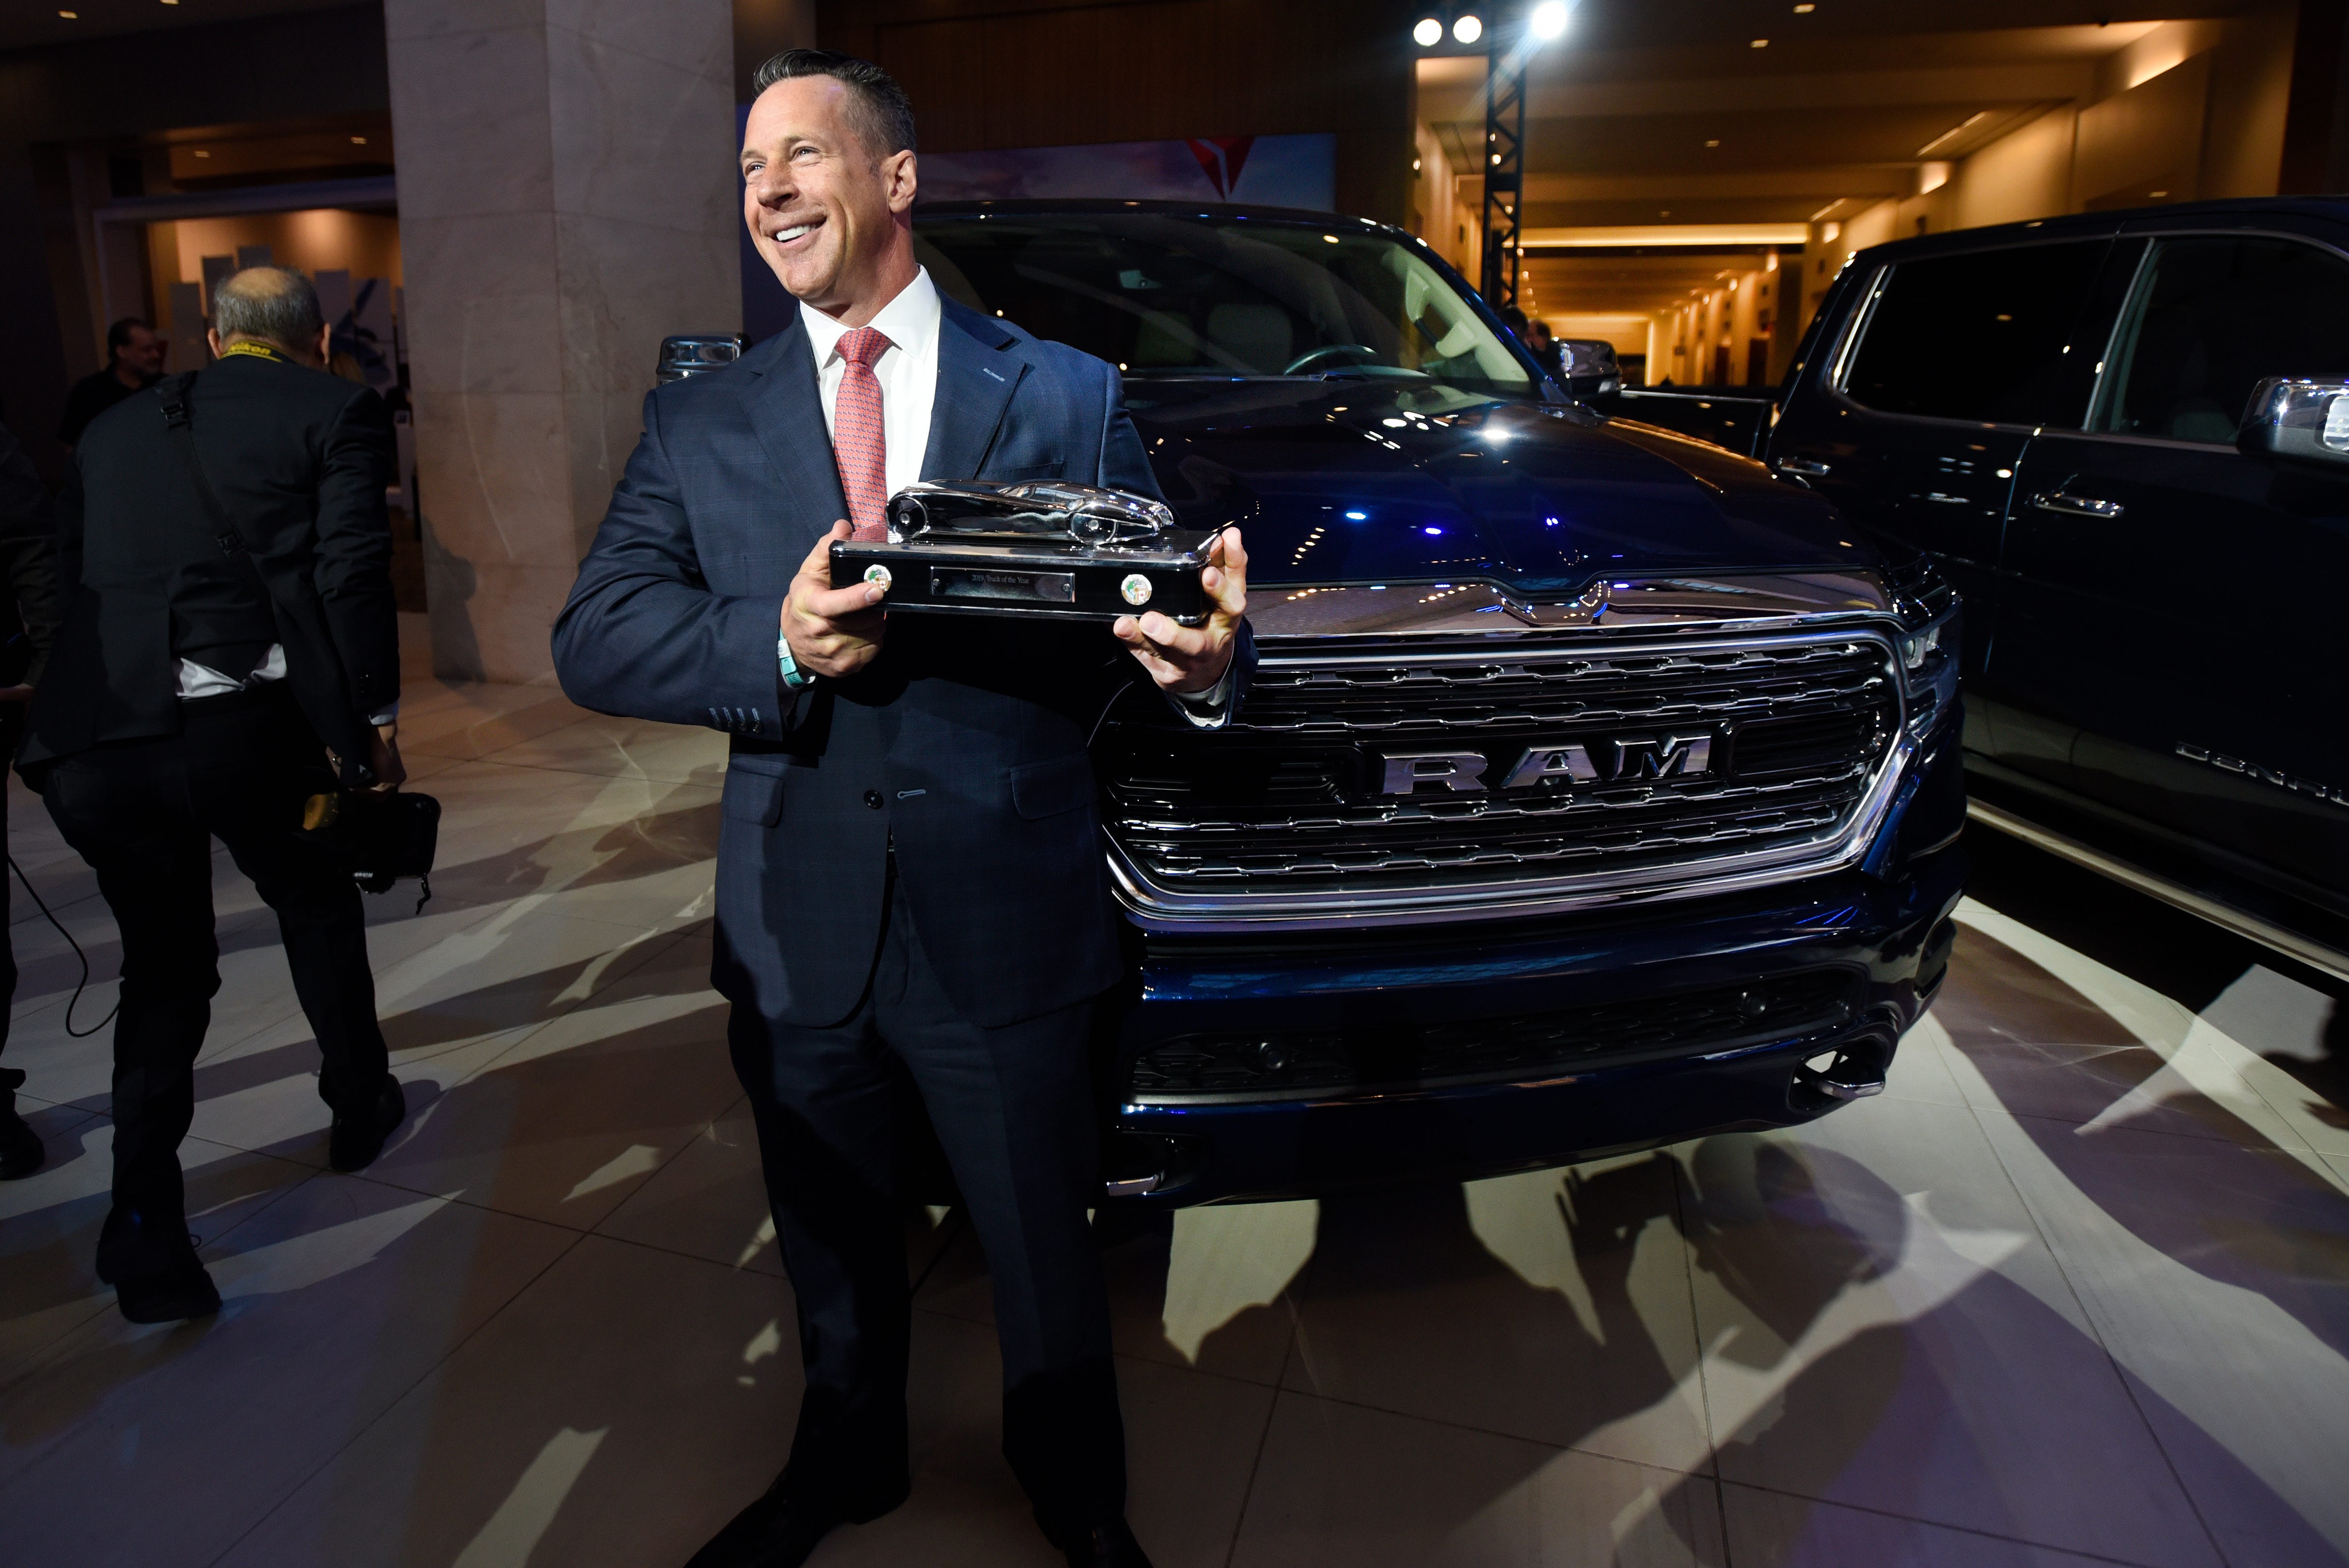 Reid Bigland, head of the Ram brand, shows off the Truck of the Year award next to the Ram 1500.